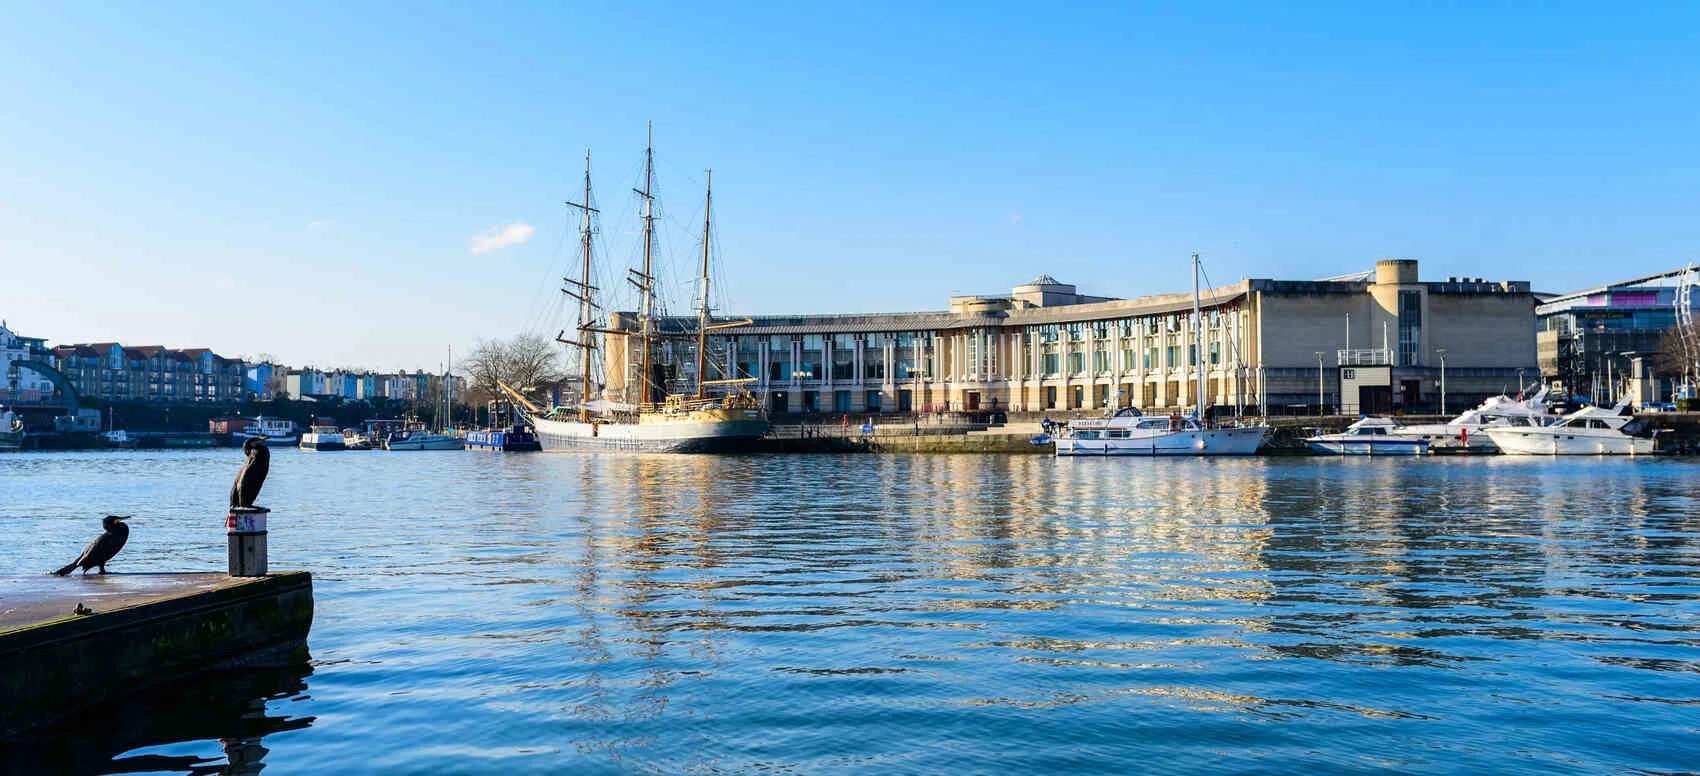 Bristol harbourside showing the buildings ships and water birds